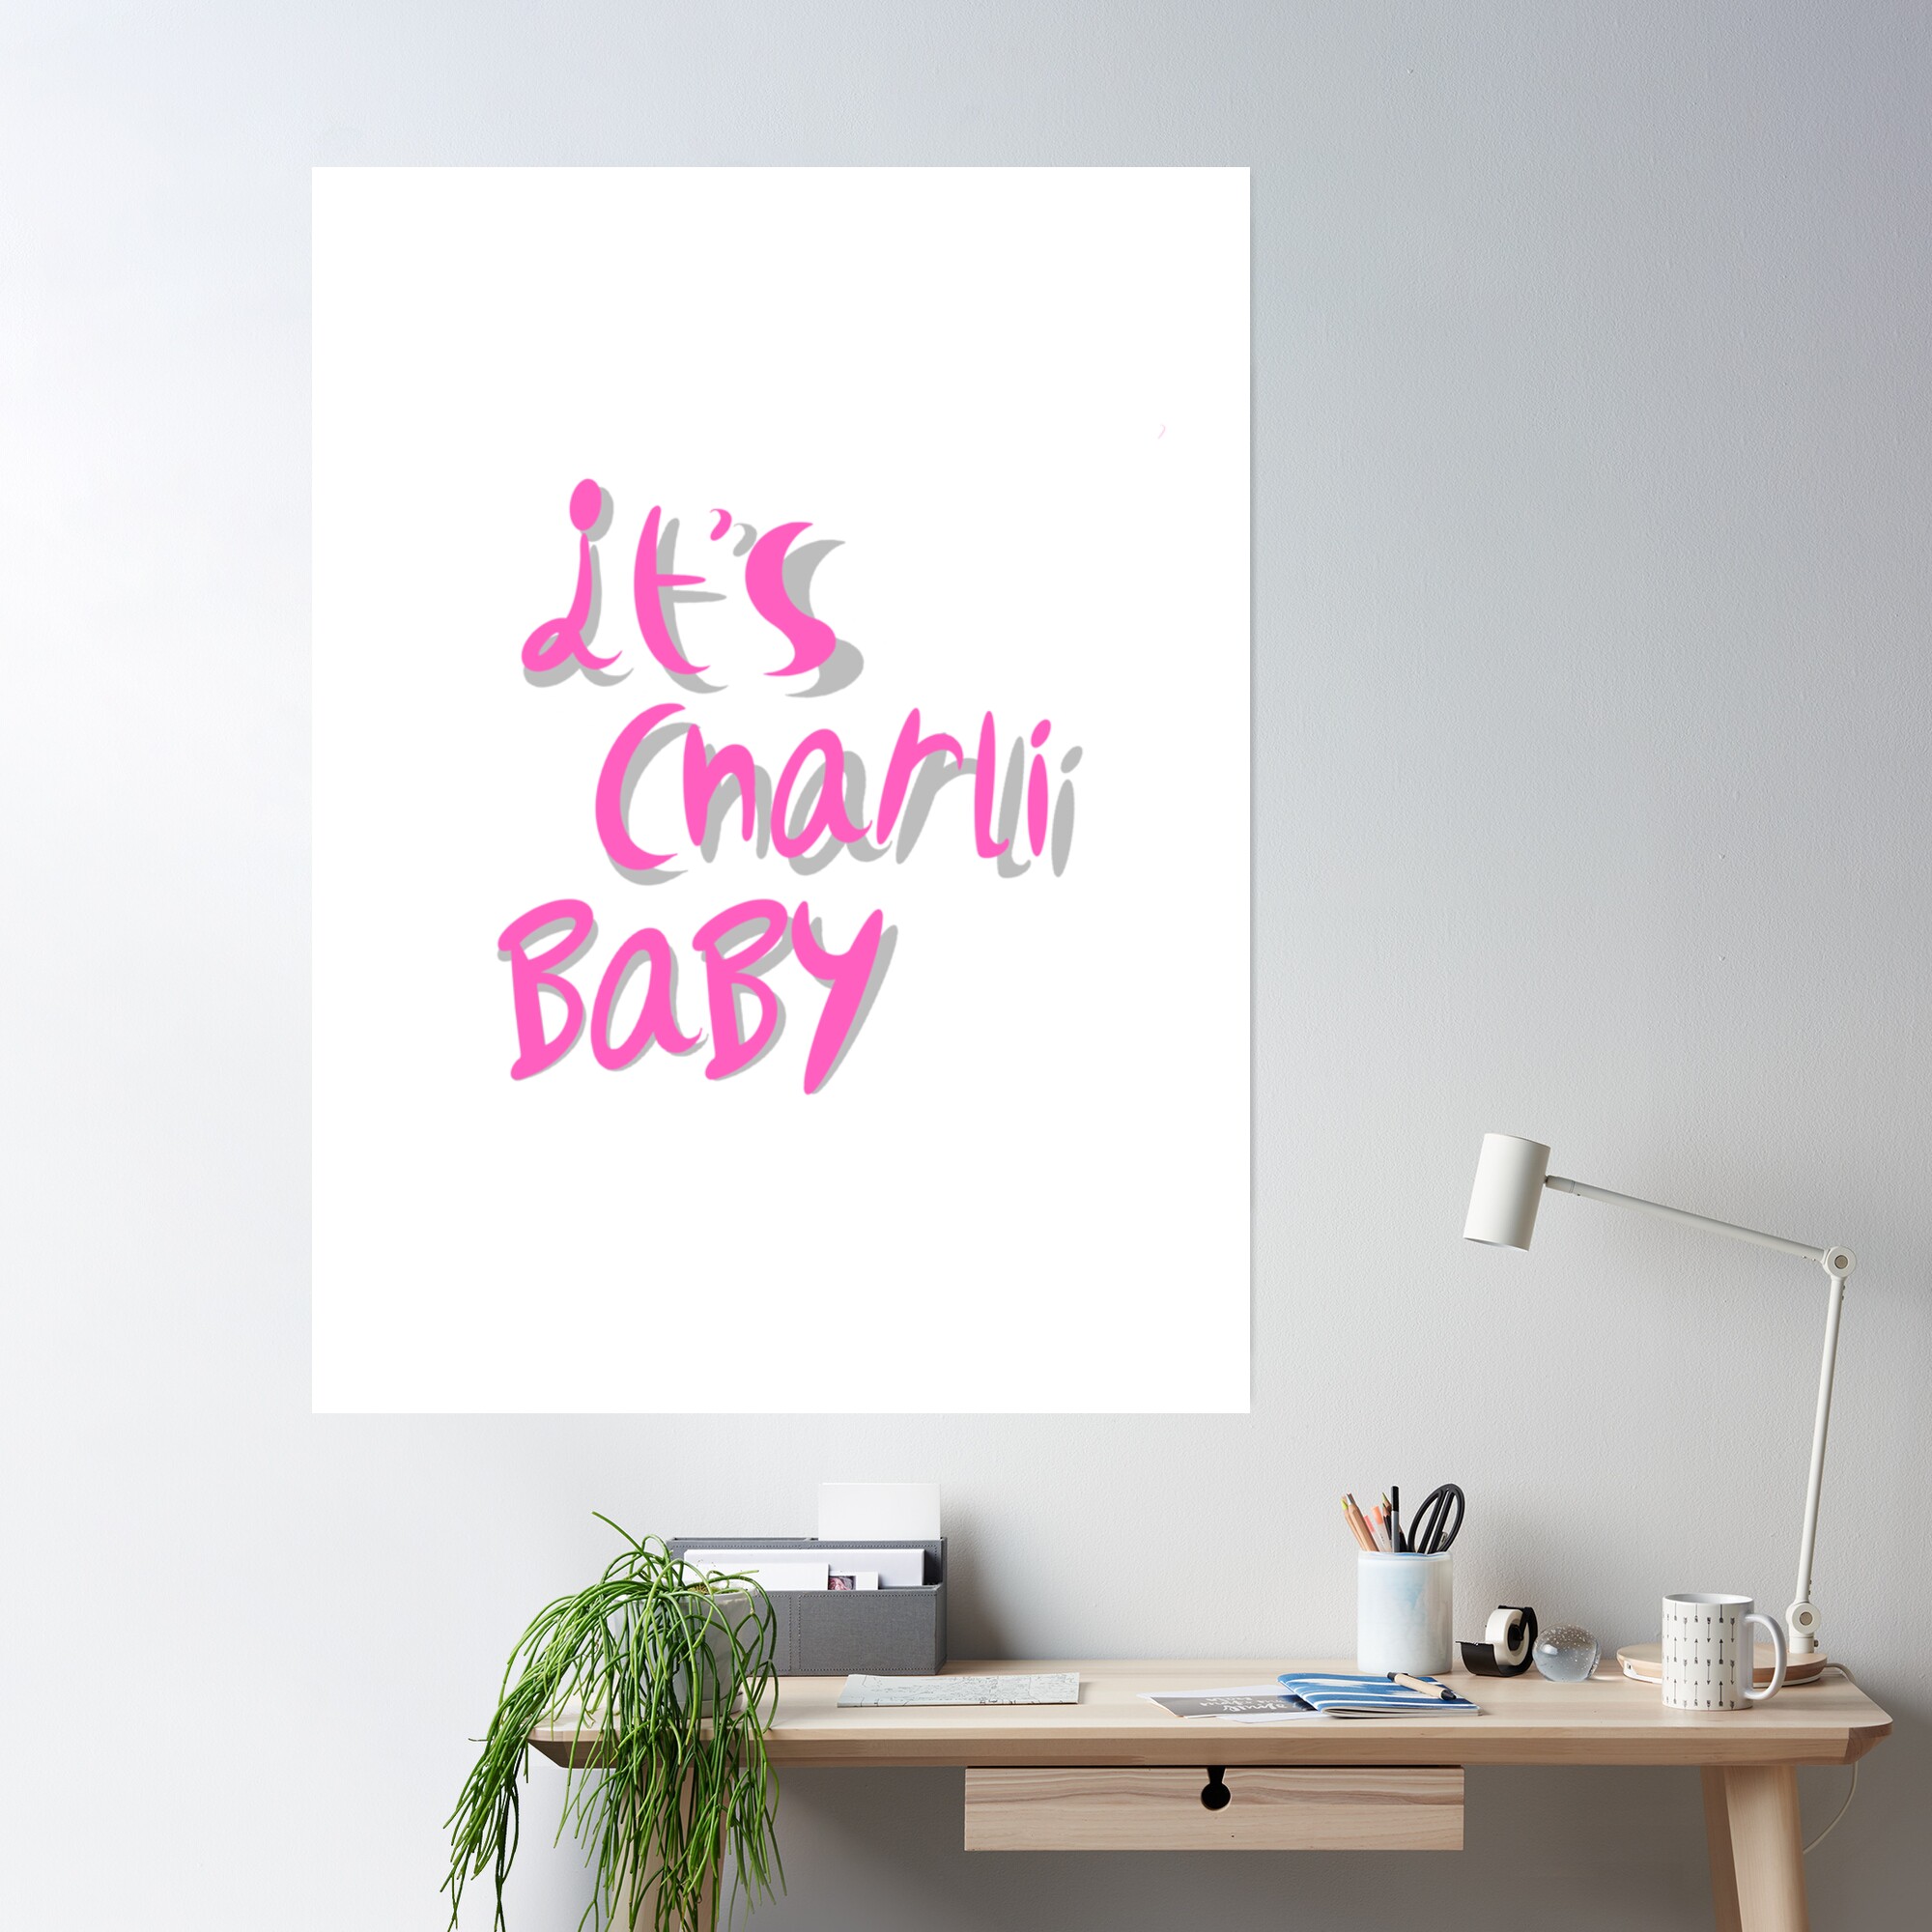 cposterlargesquare product2000x2000 7 - Charli XCX Shop